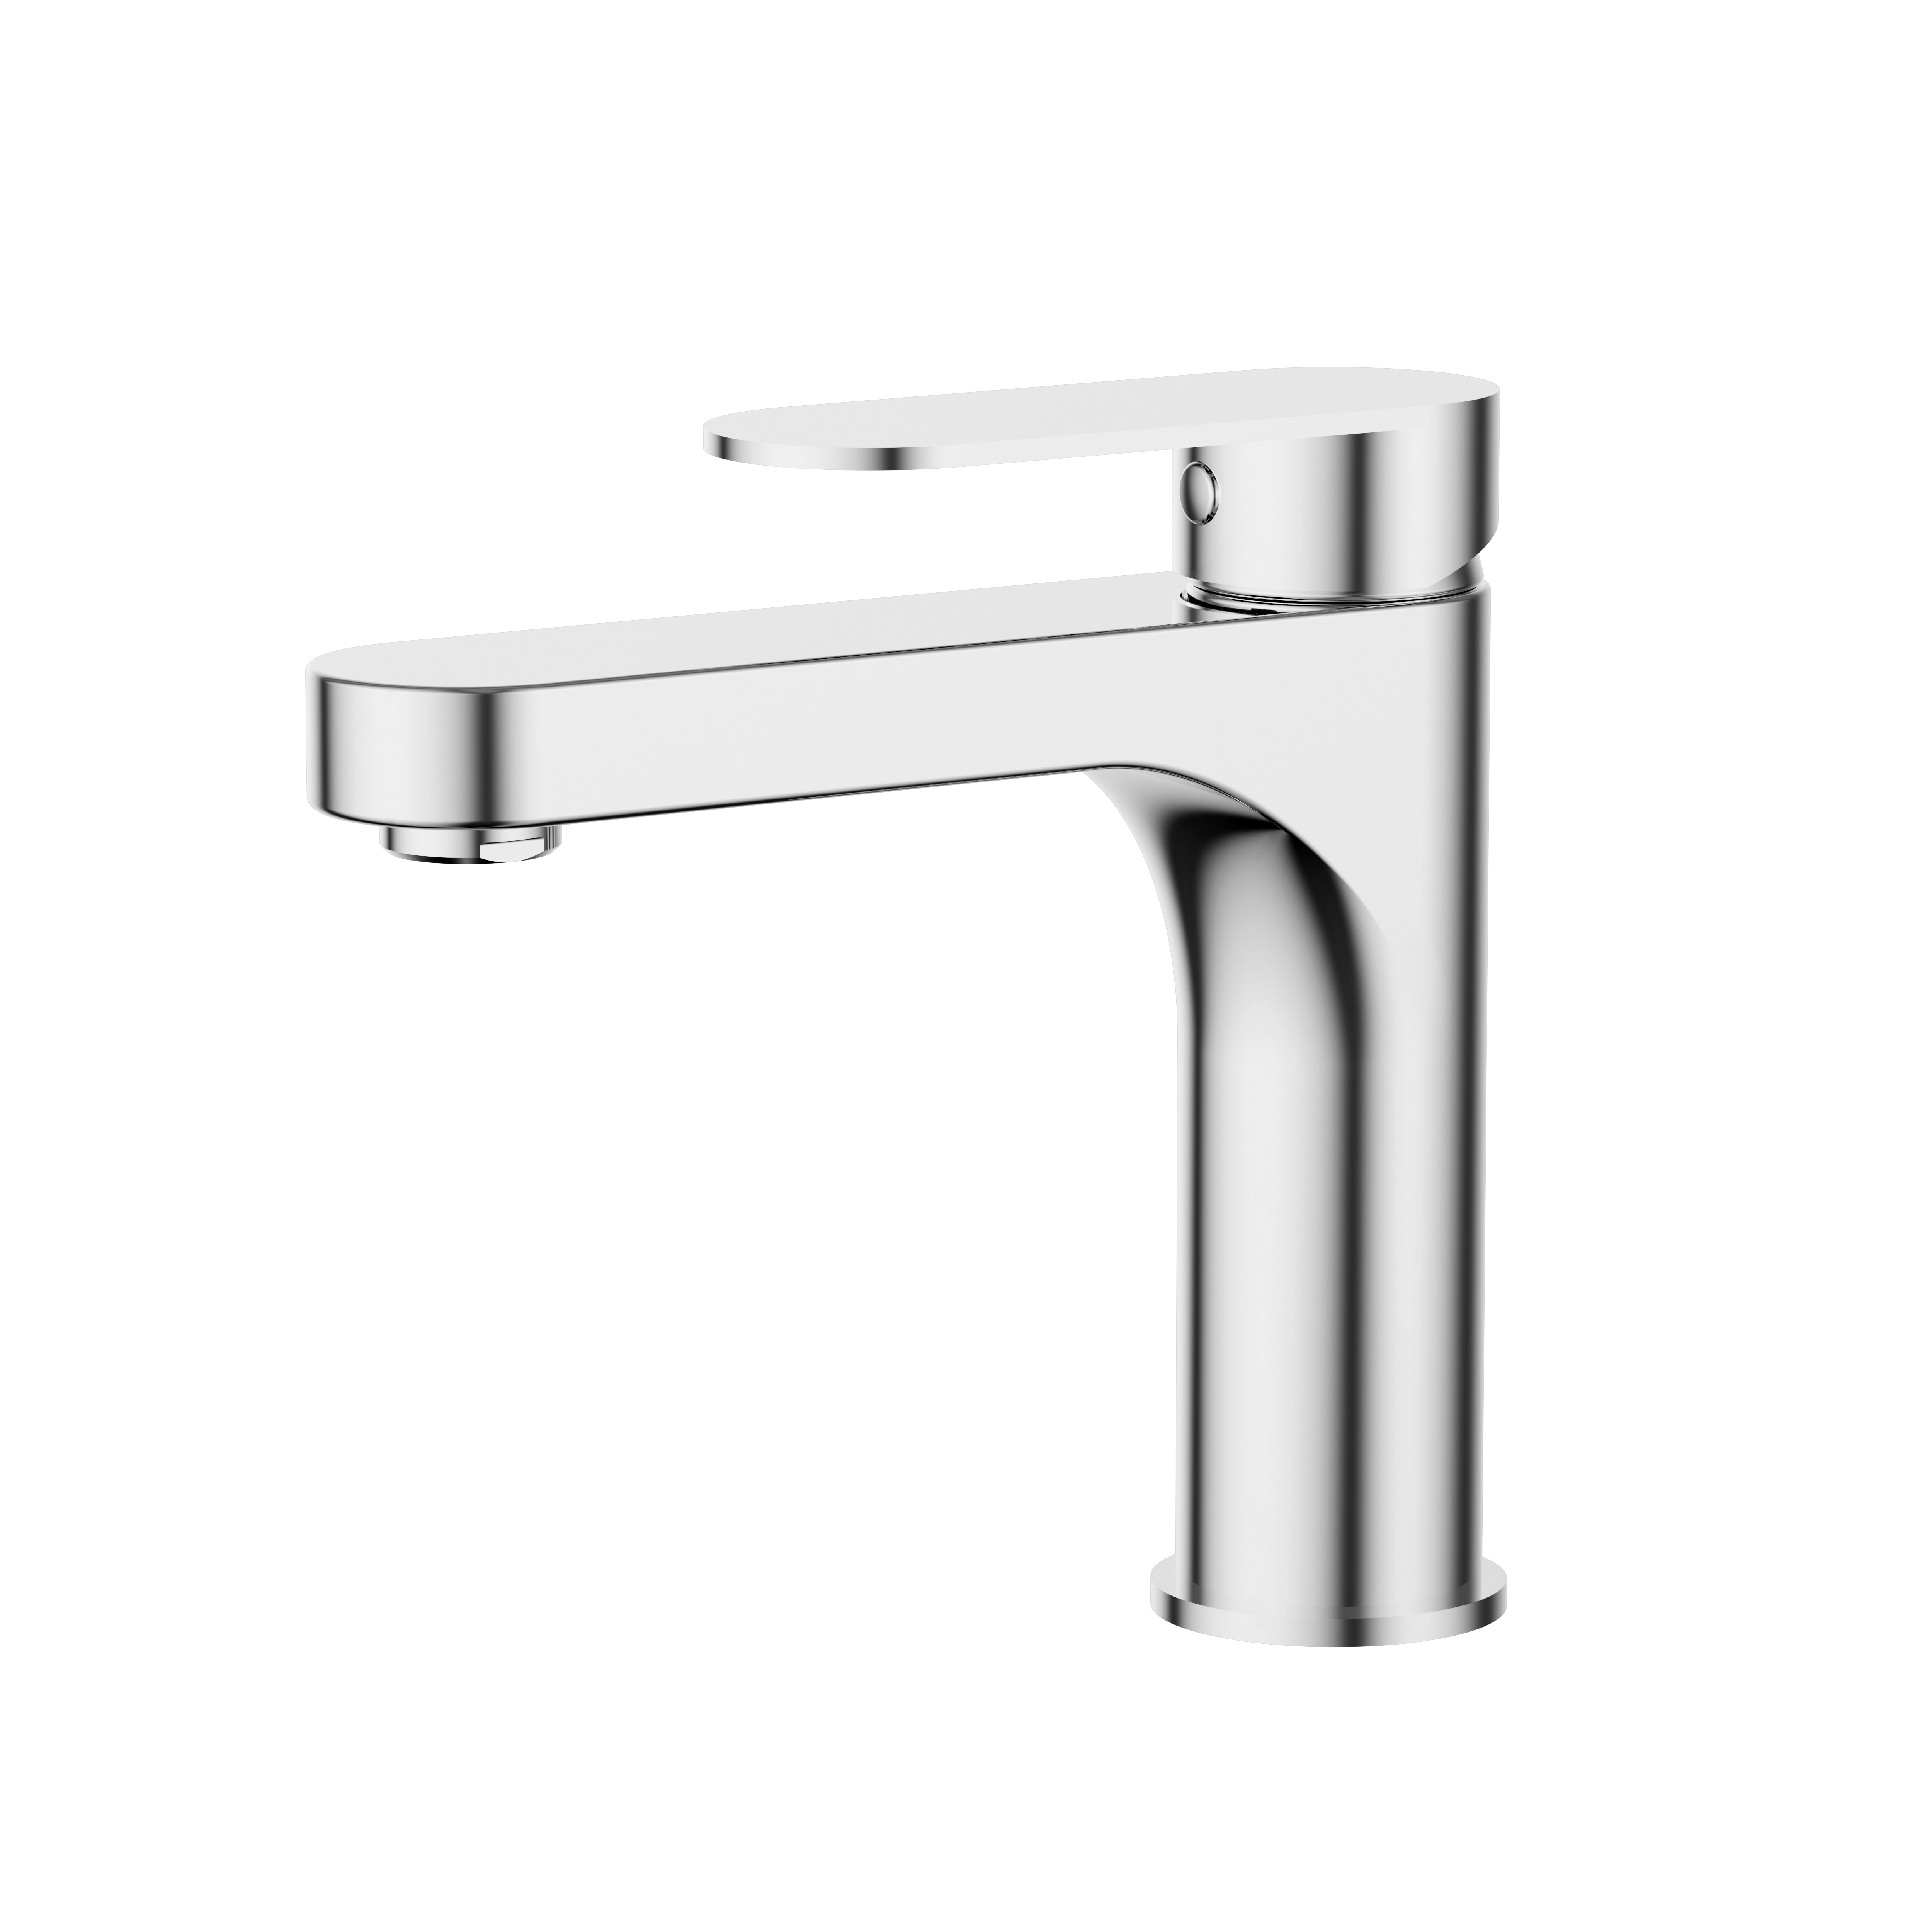 Conventional Modern Single Handle Bathroom Sink Faucet Fixtures in Chrome